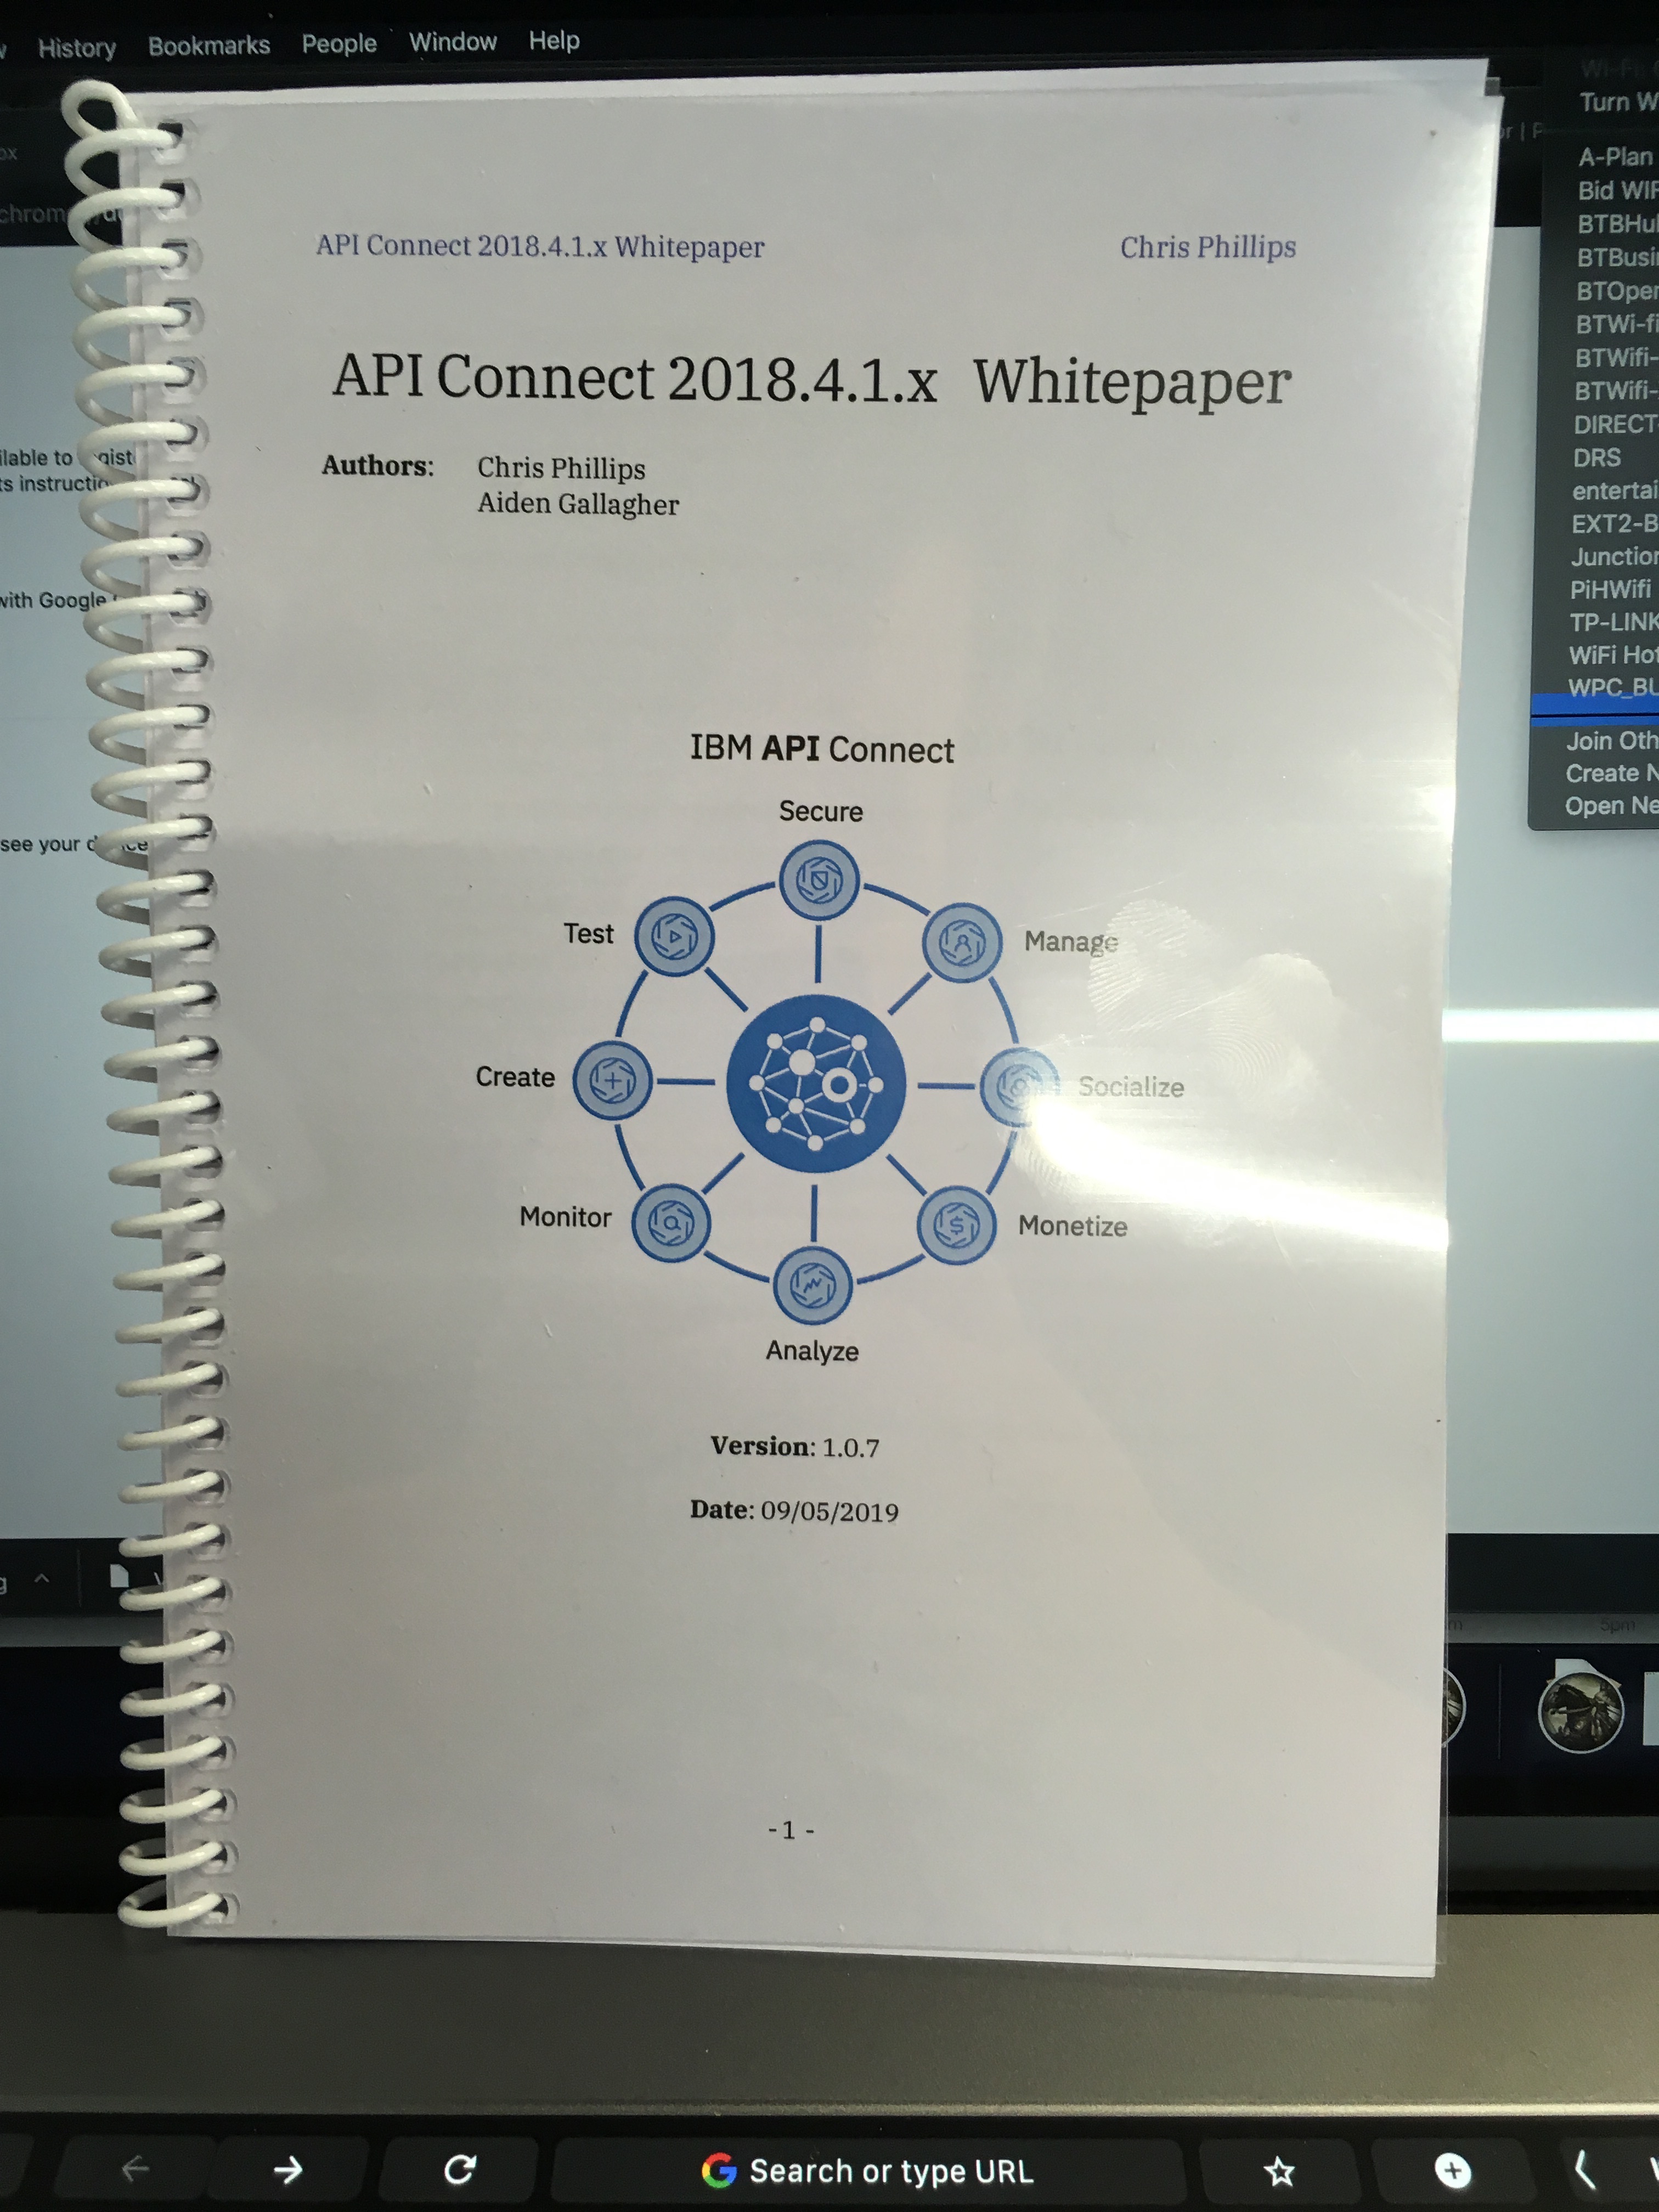 IBM API Connect WhitePaper in Physical Form